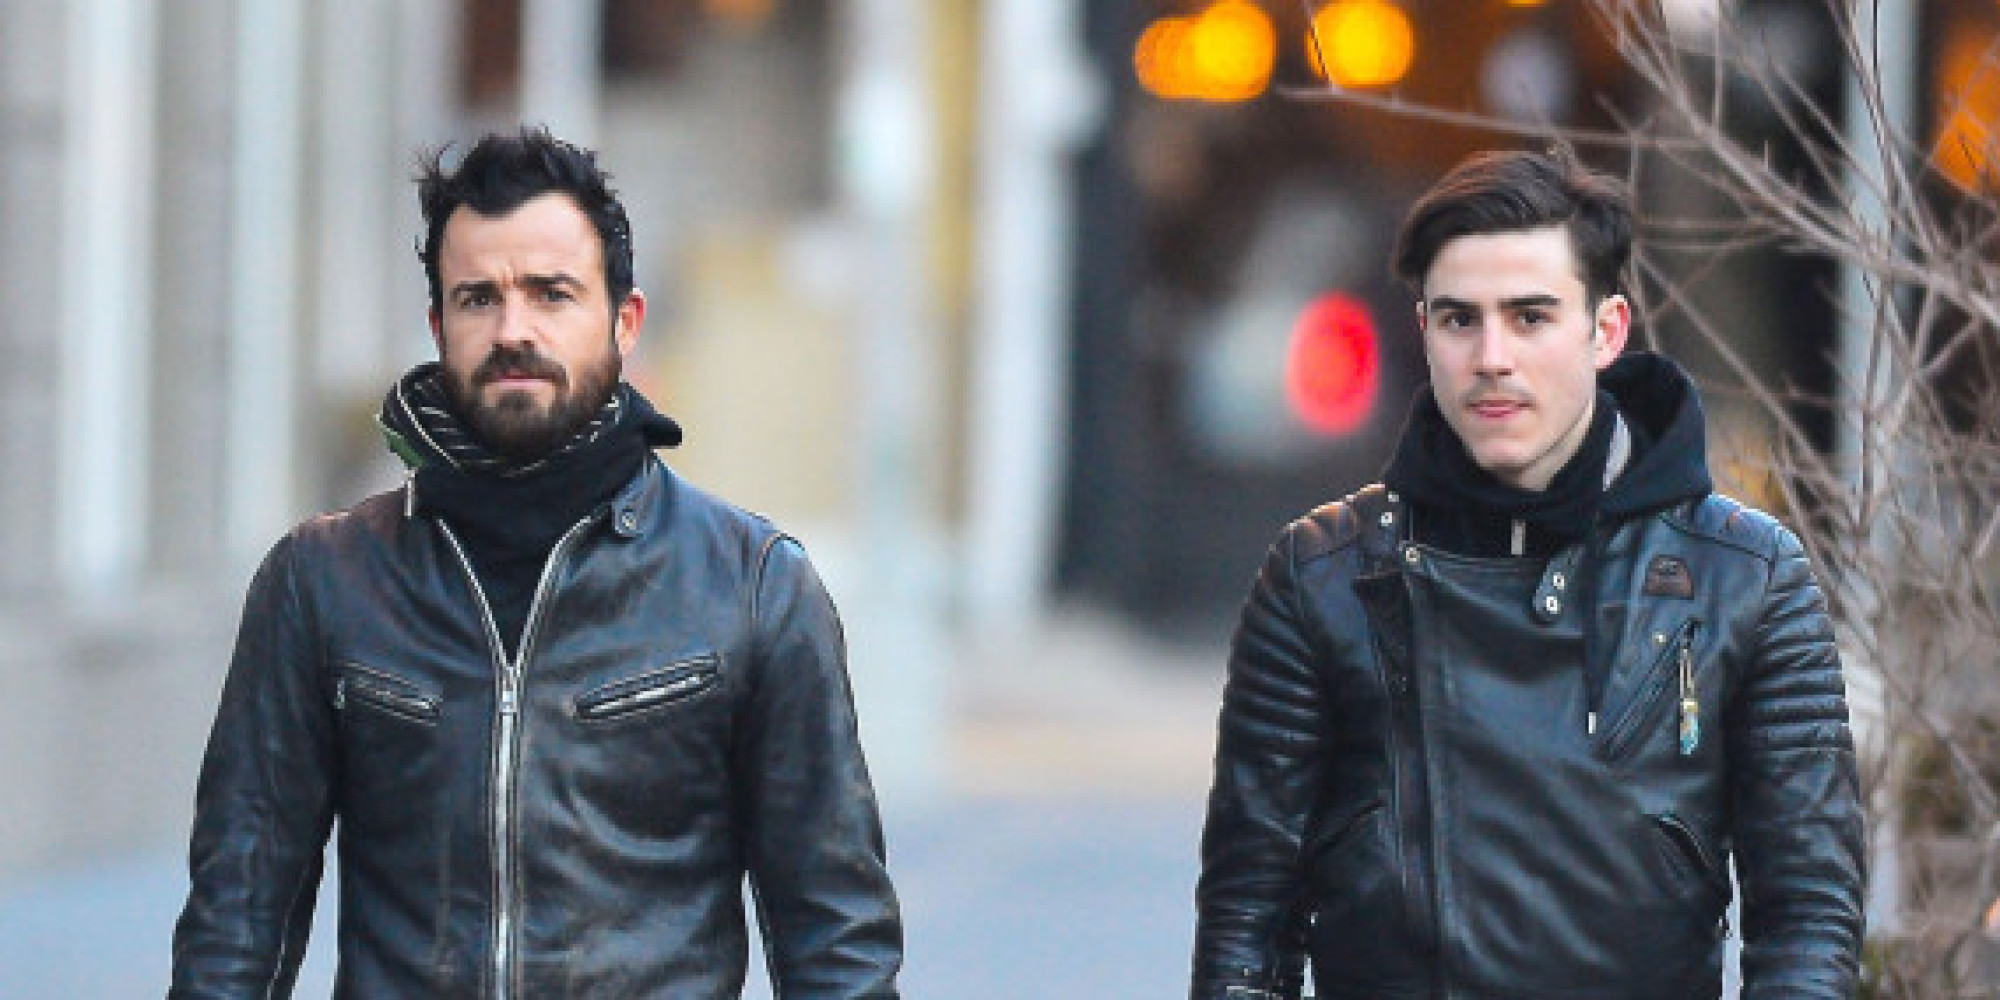 Justin Theroux And Brother Sebastian Theroux Wear Matching Leather In Nyc Photo Huffpost